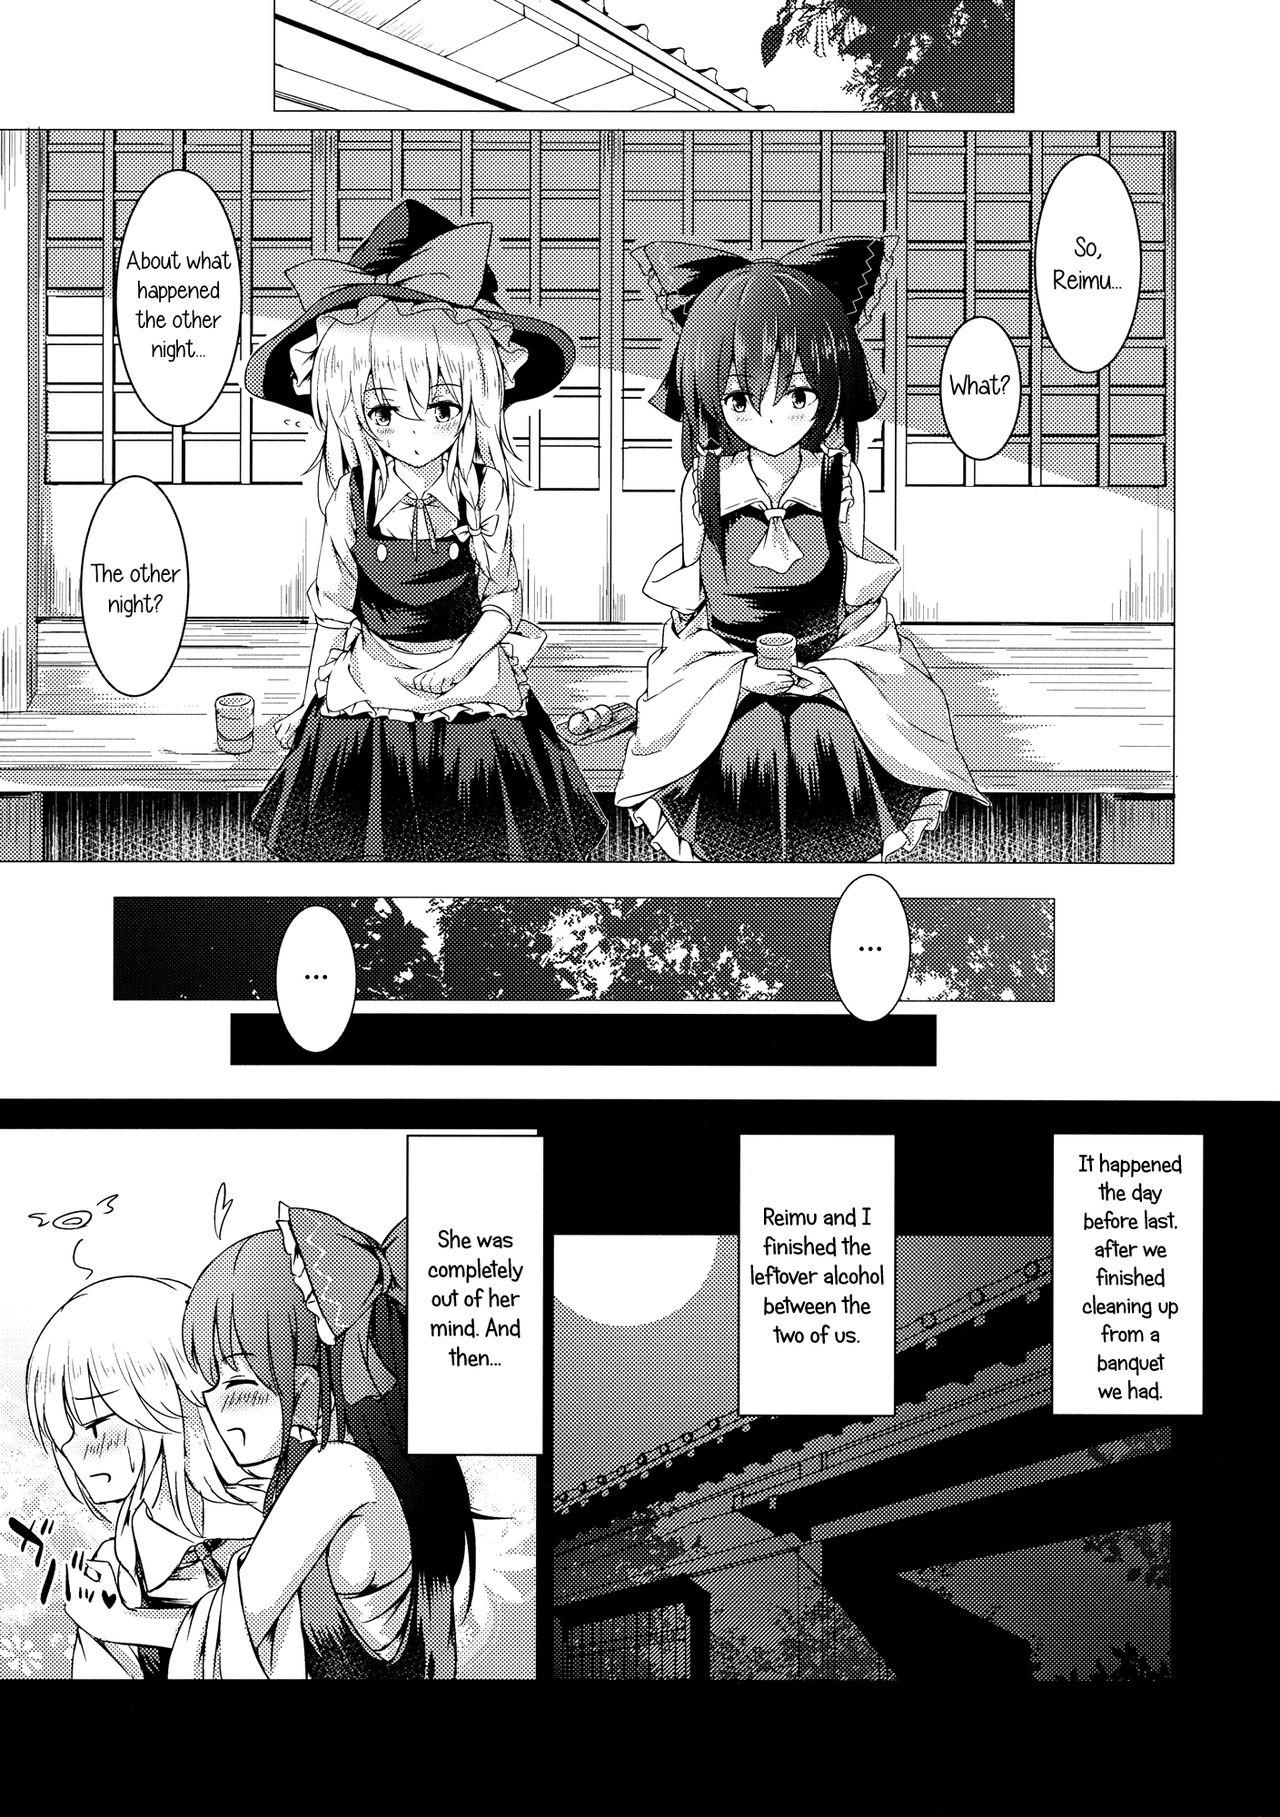 European Porn ever since - Touhou project Ass To Mouth - Page 4